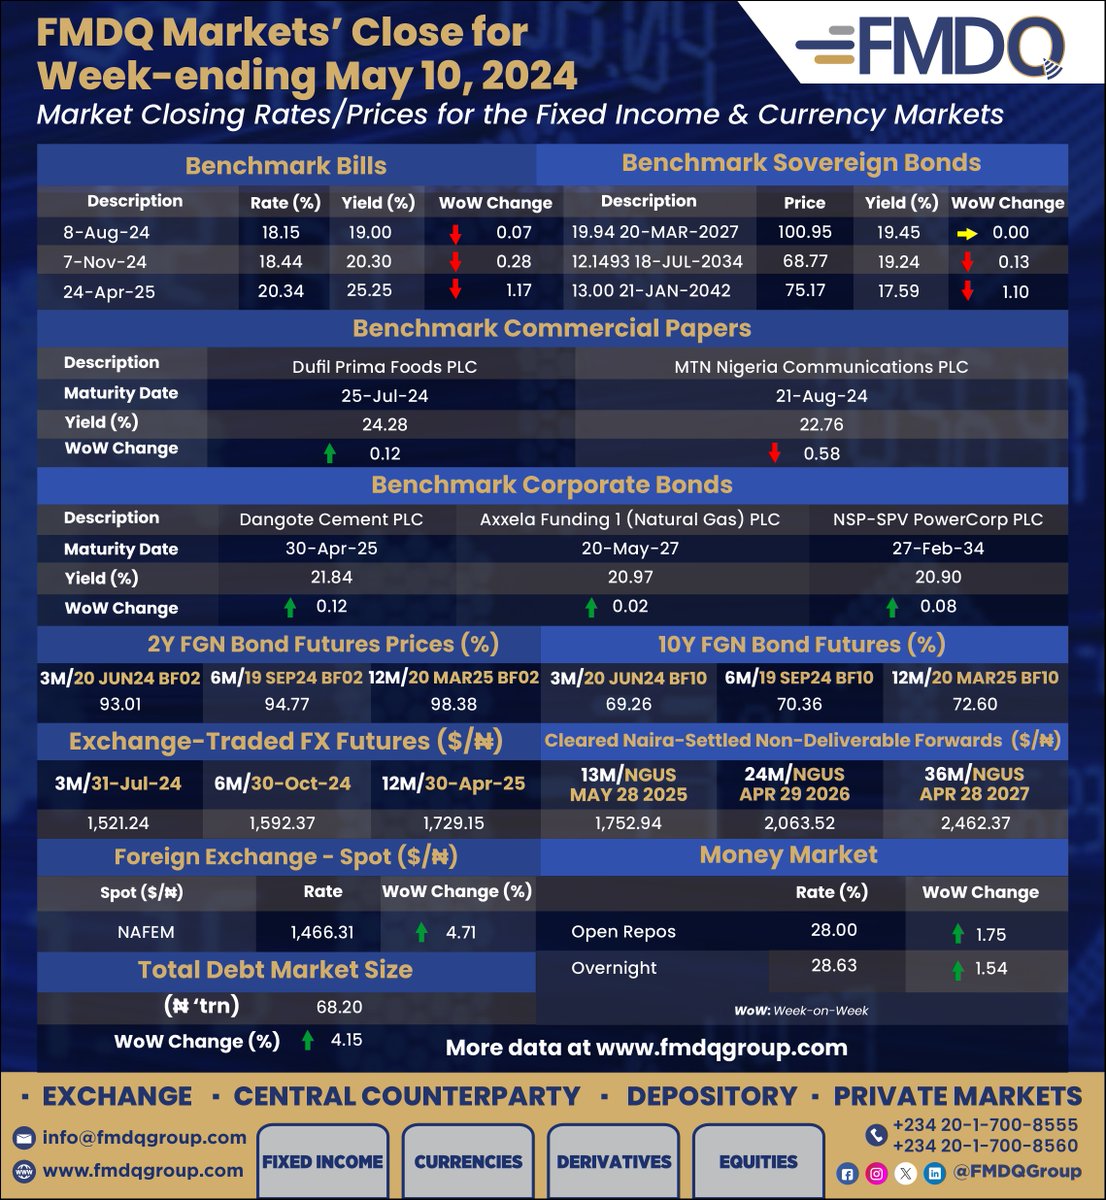 Here is how FMDQ Markets closed for the week-ended Friday, May 10, 2024.

#FixedIncome #FX #Derivatives #Exchange #CCP #Depository #MarketData #Information #CapitalMarket #Turnover #Performance